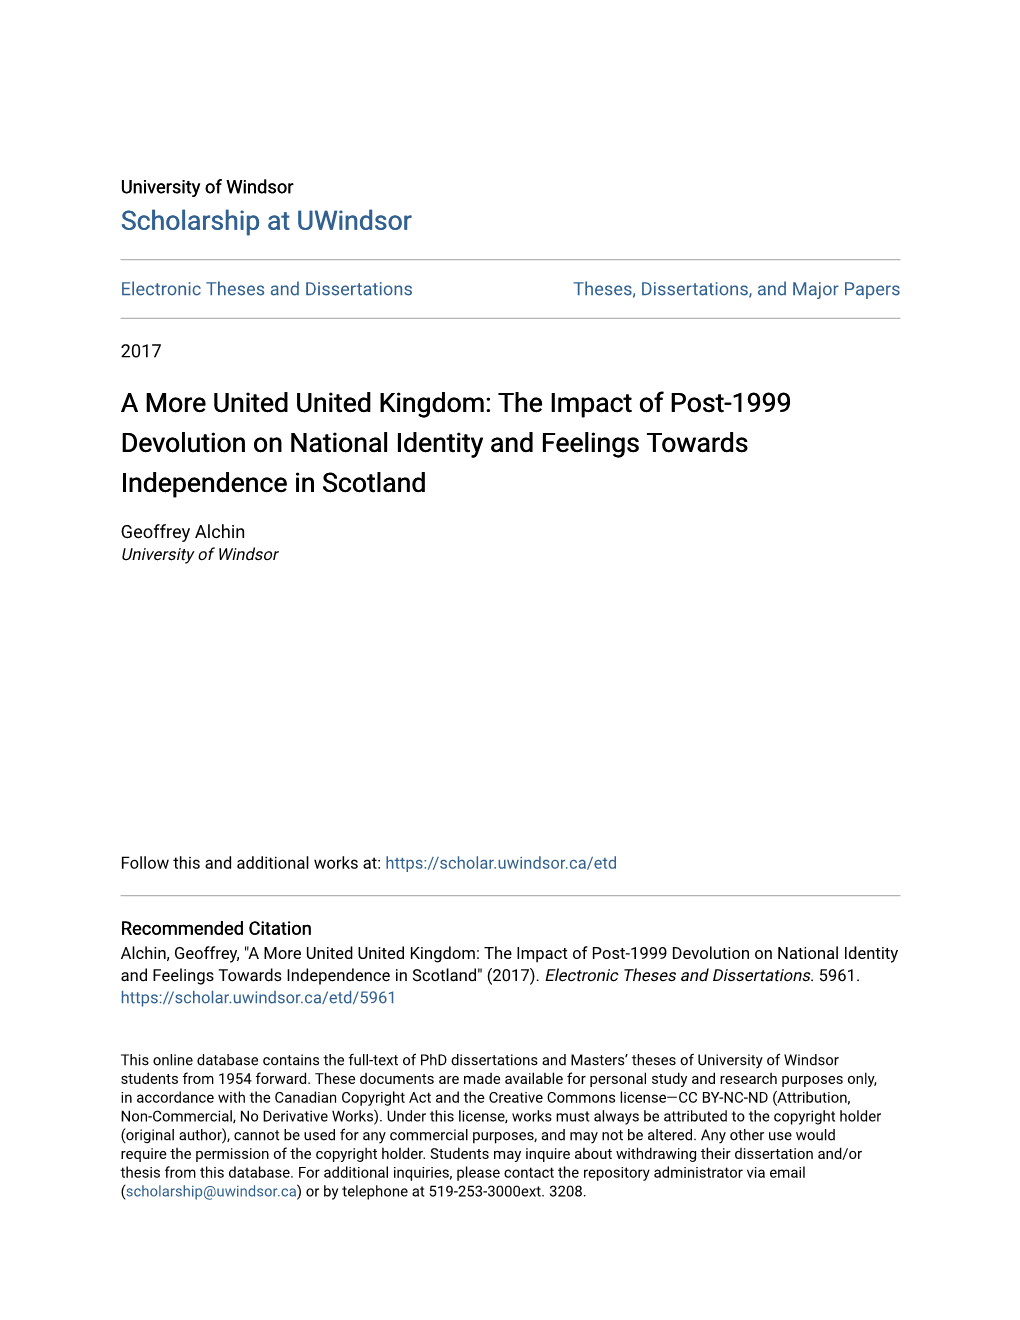 A More United United Kingdom: the Impact of Post-1999 Devolution on National Identity and Feelings Towards Independence in Scotland